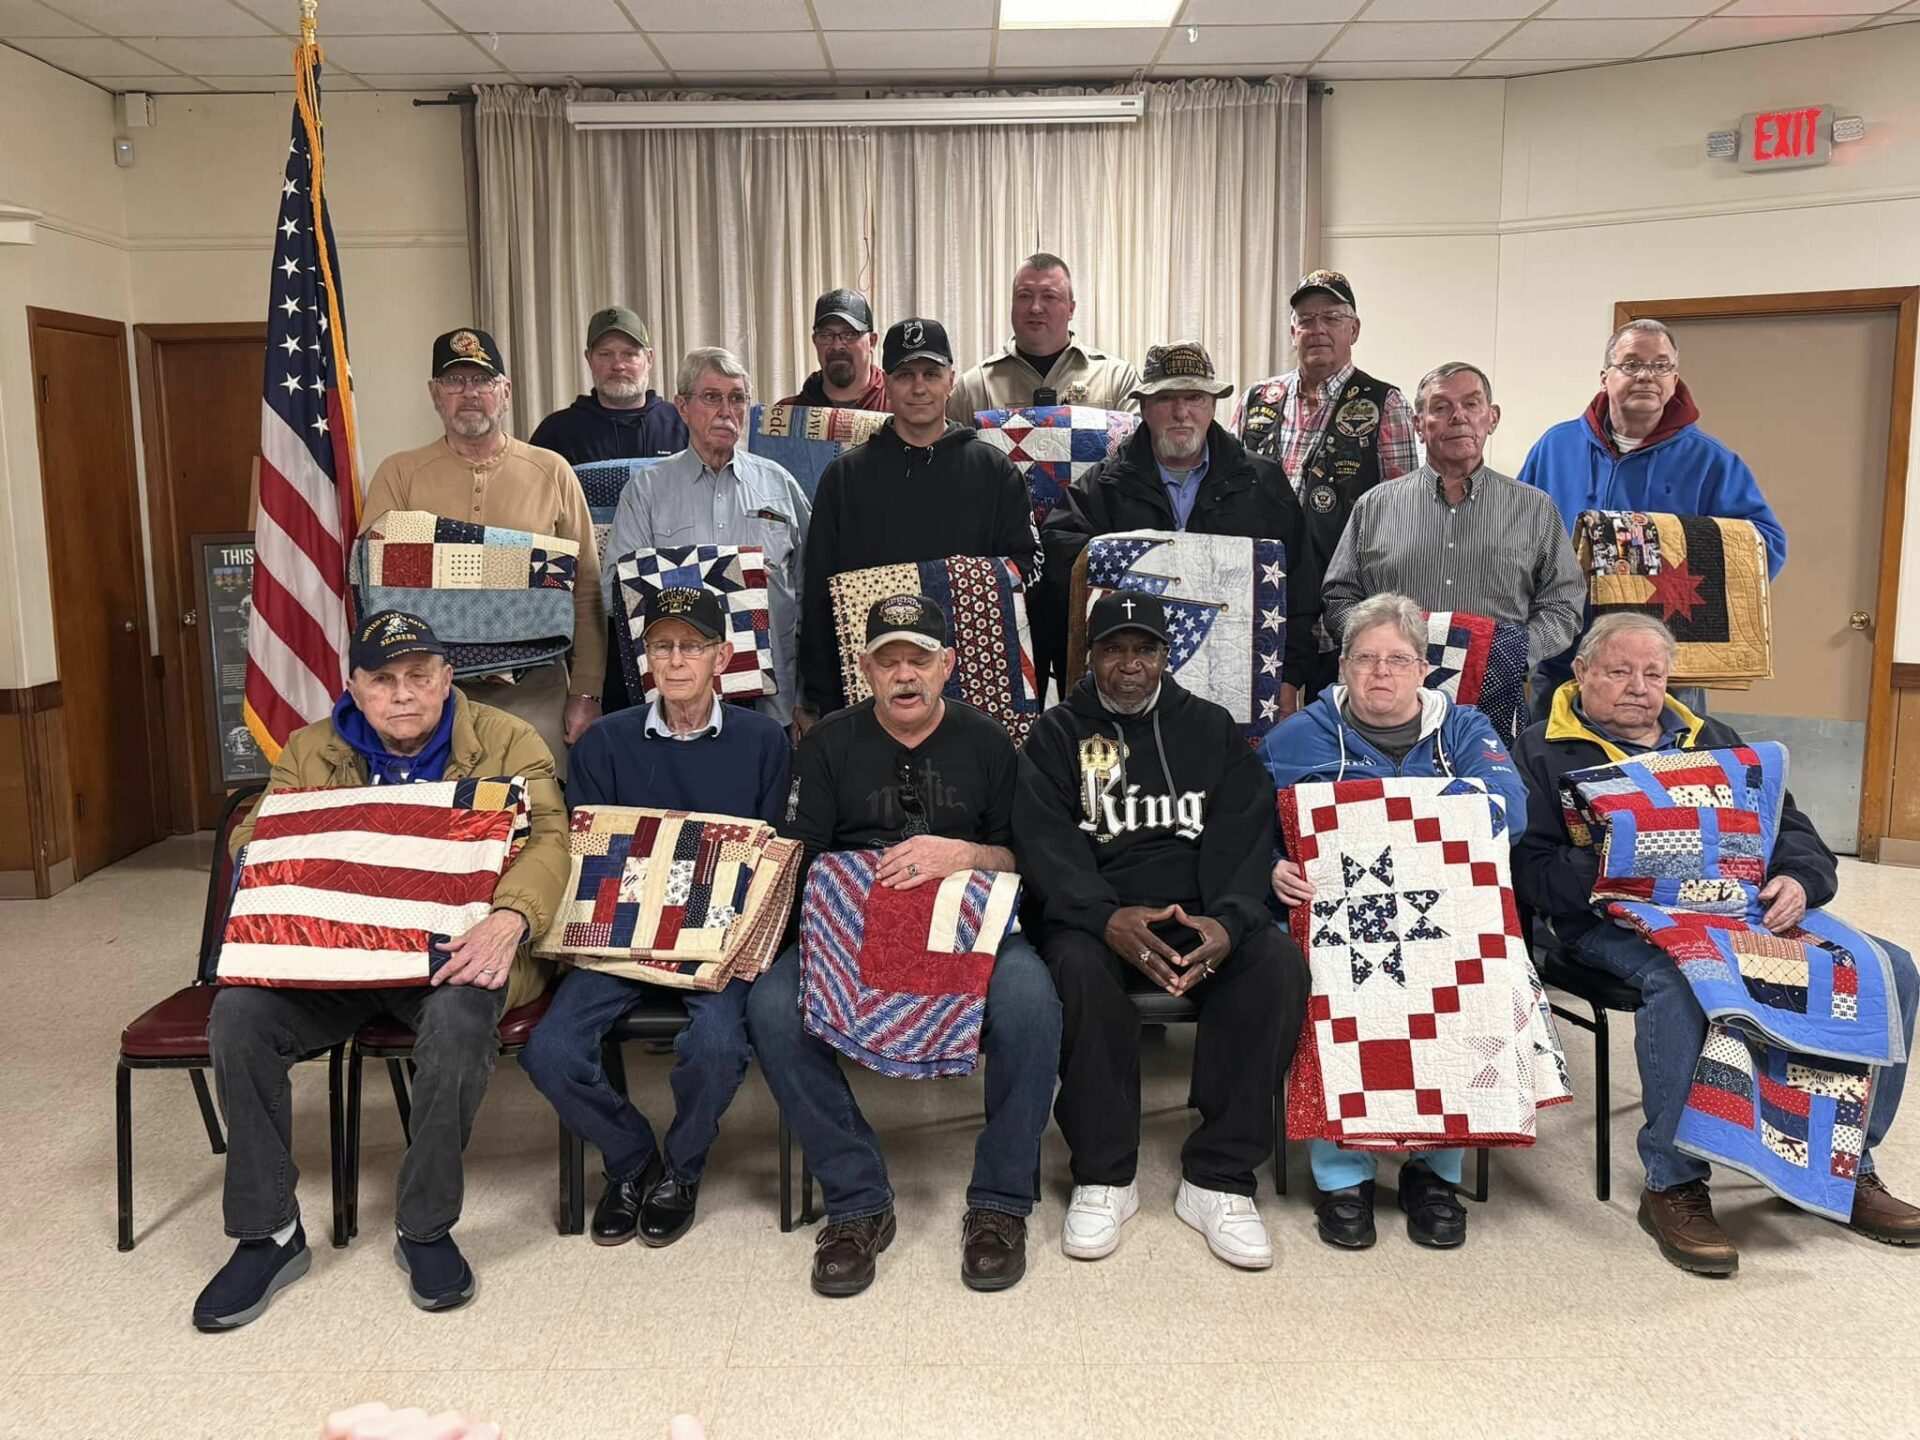 Quilts of Valor Foundation gives warmth and comfort to deserving veterans